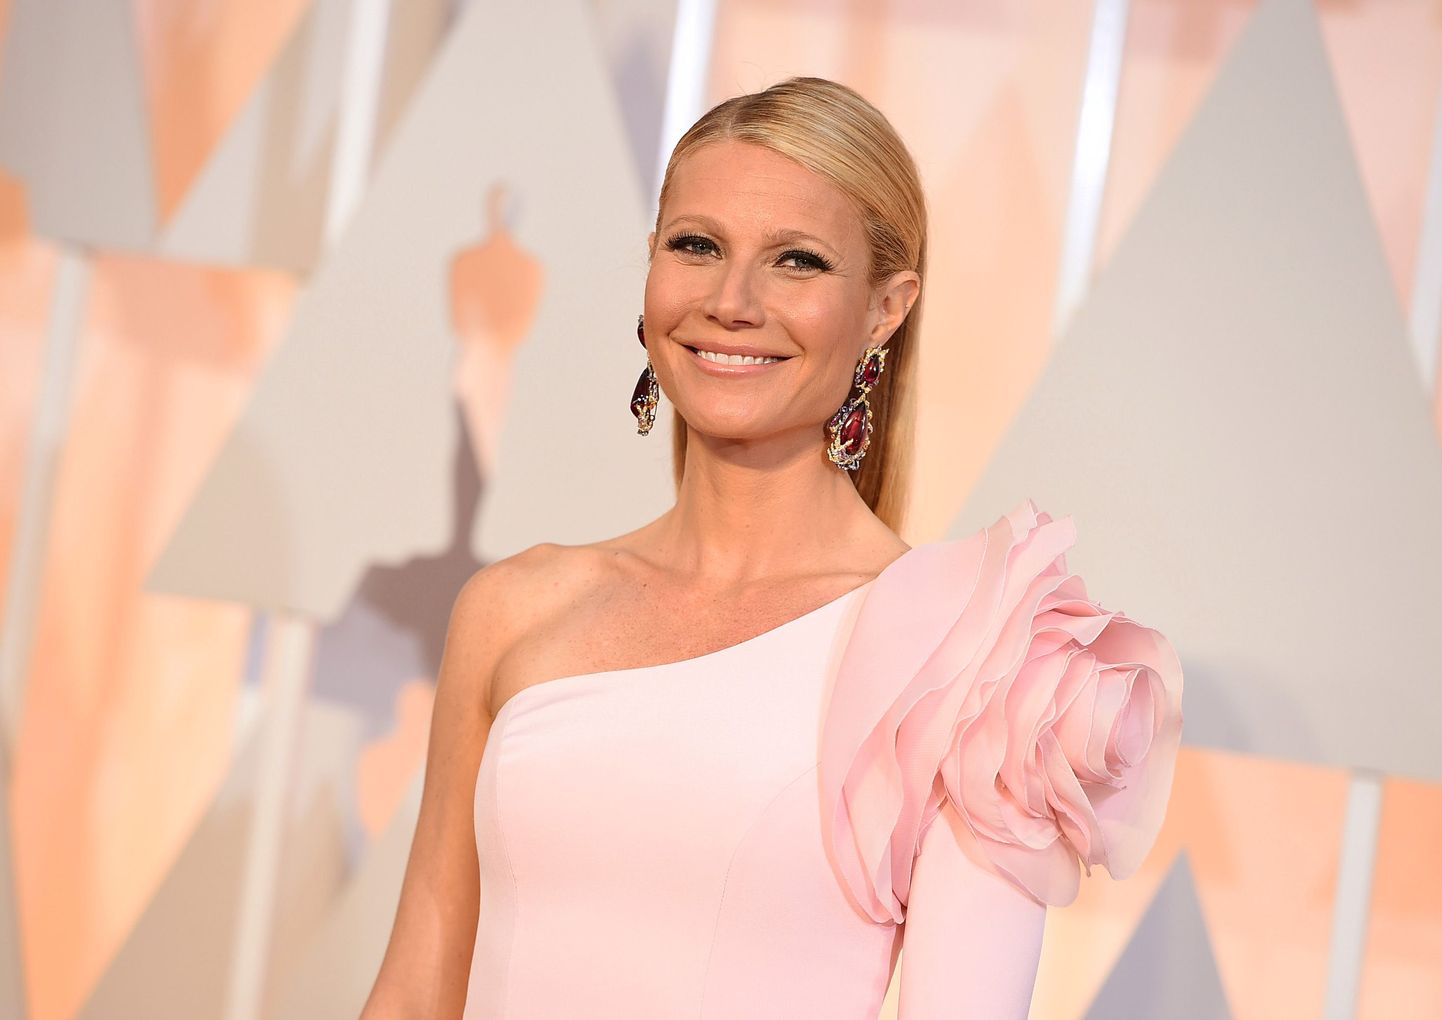 Gwyneth Paltrow arrives at the Oscars on Sunday, Feb. 22, 2015, at the Dolby Theatre in Los Angeles. (Photo by Jordan Strauss/Invision/AP)